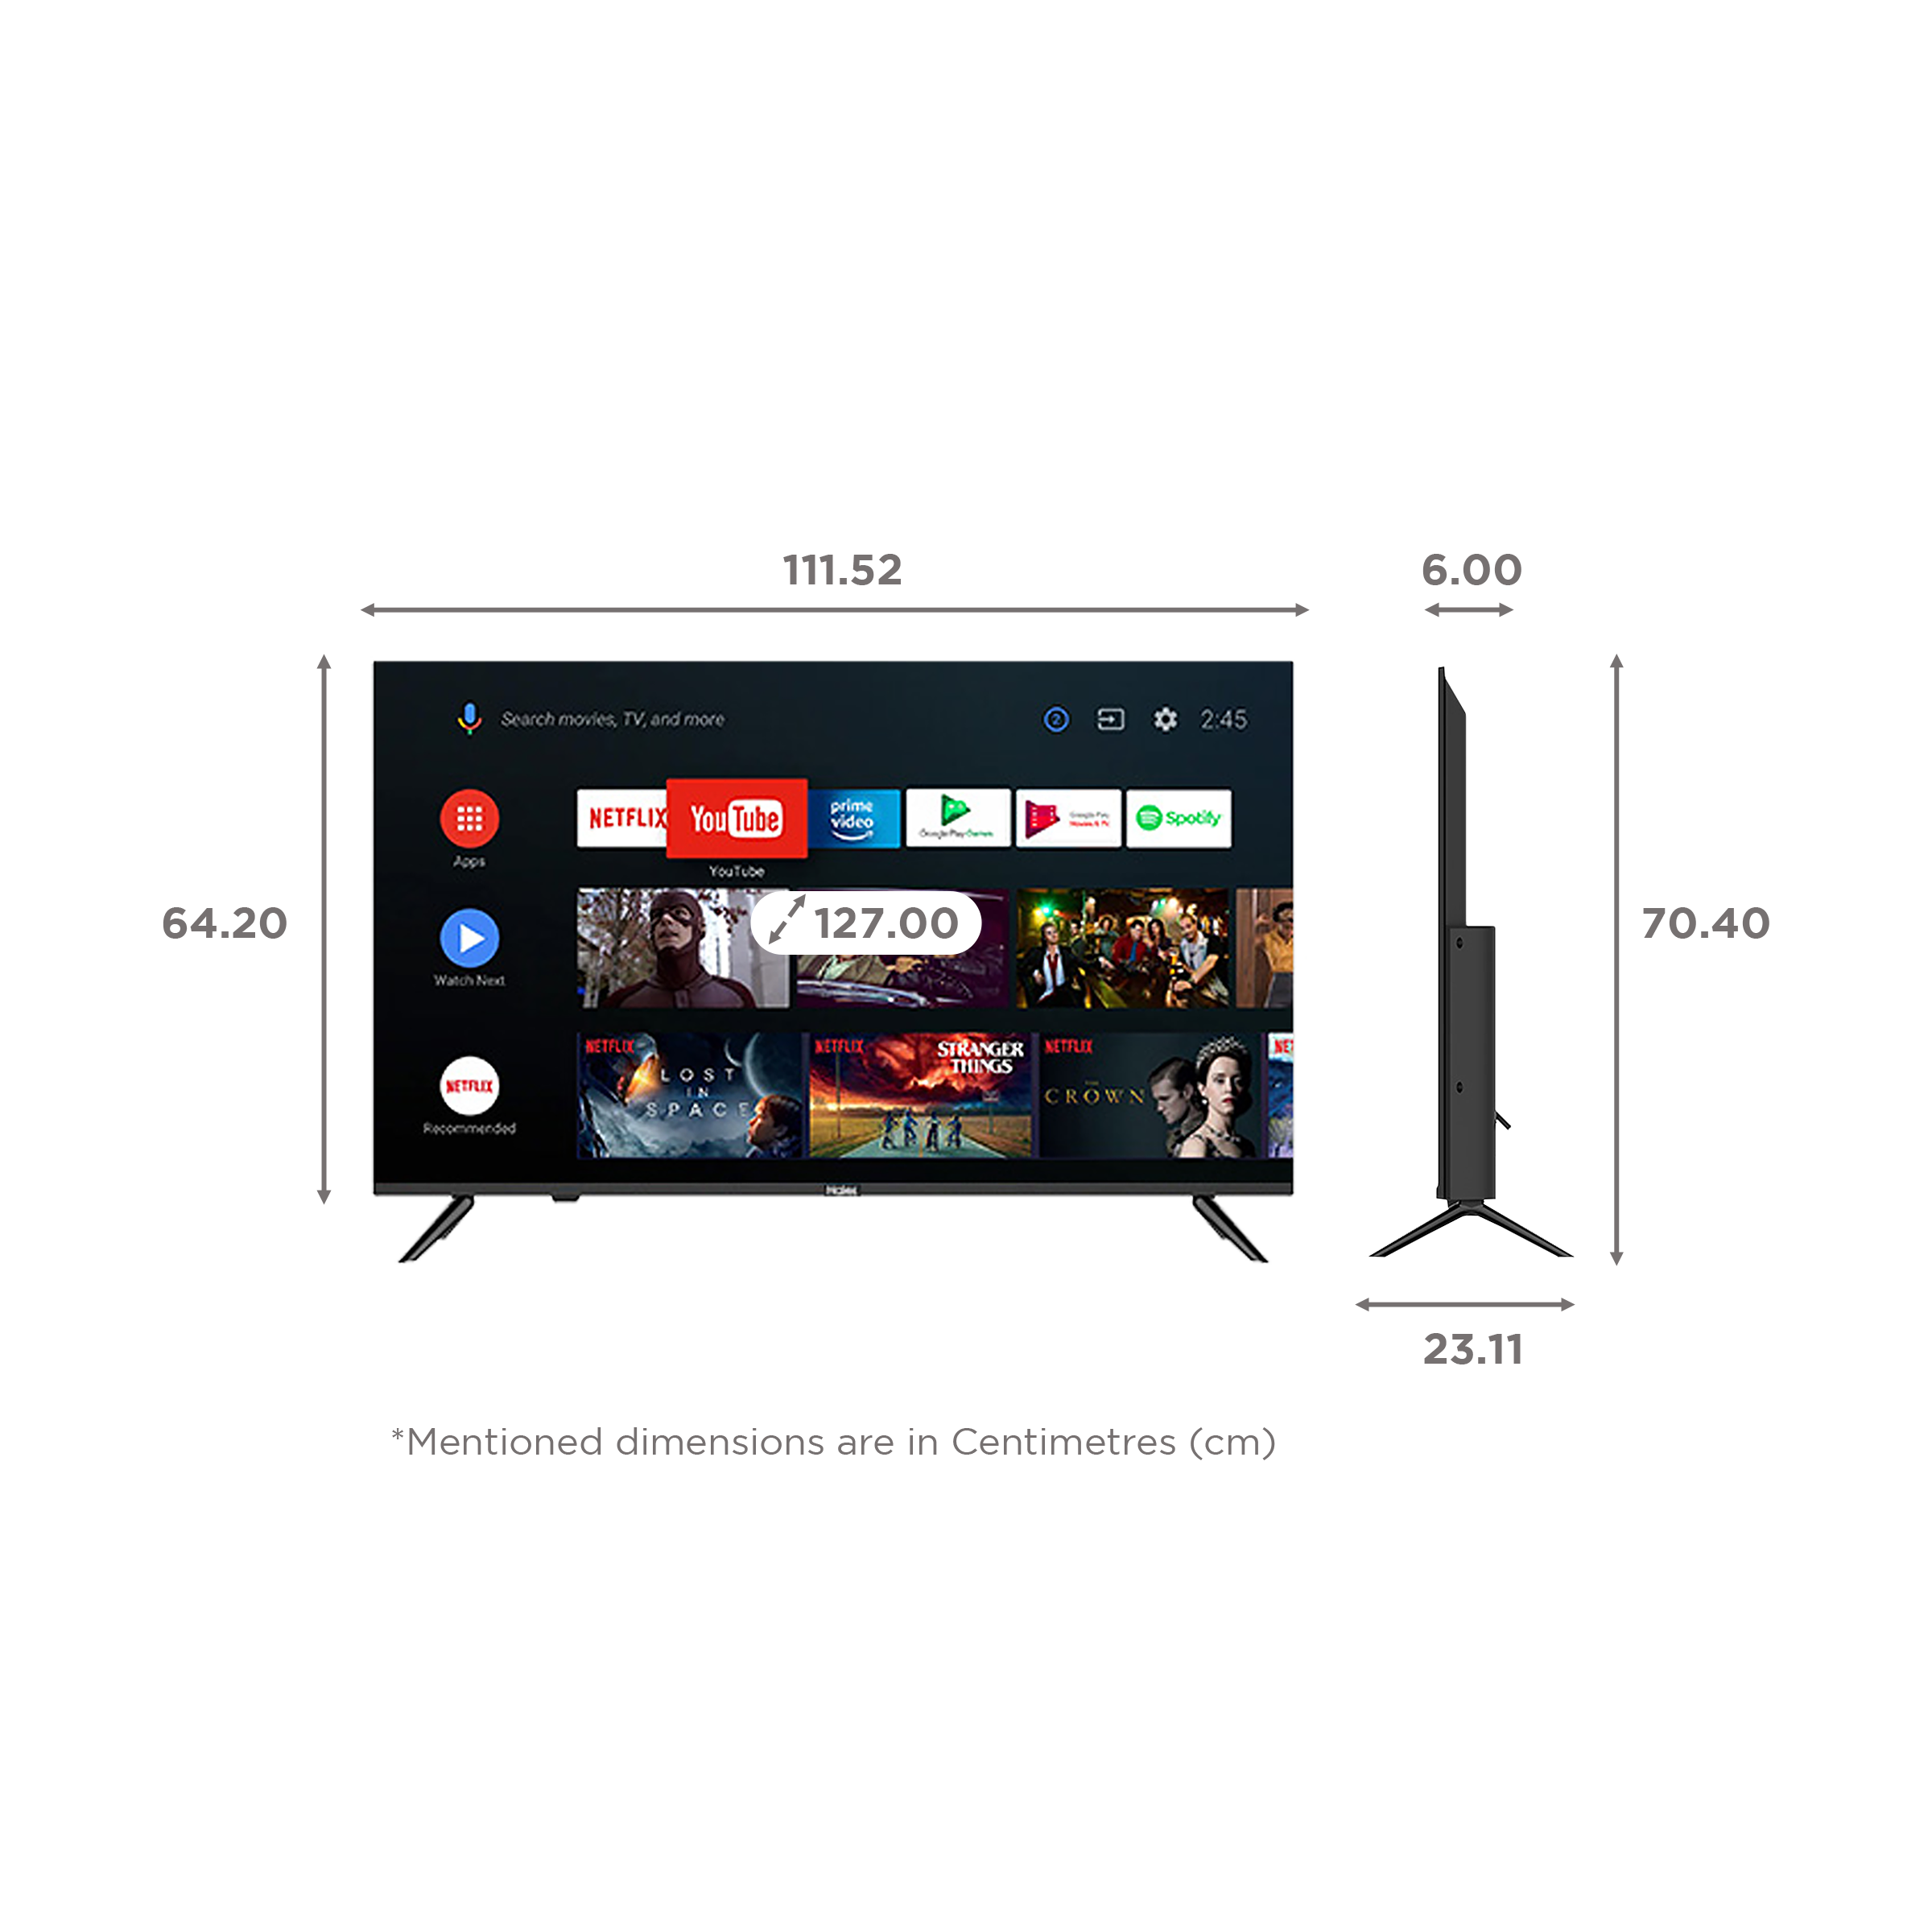 Haier K6600 Series 127 cm (50 inch) 4K Ultra HD LED Android TV with Google Assistant (2020 model)_2